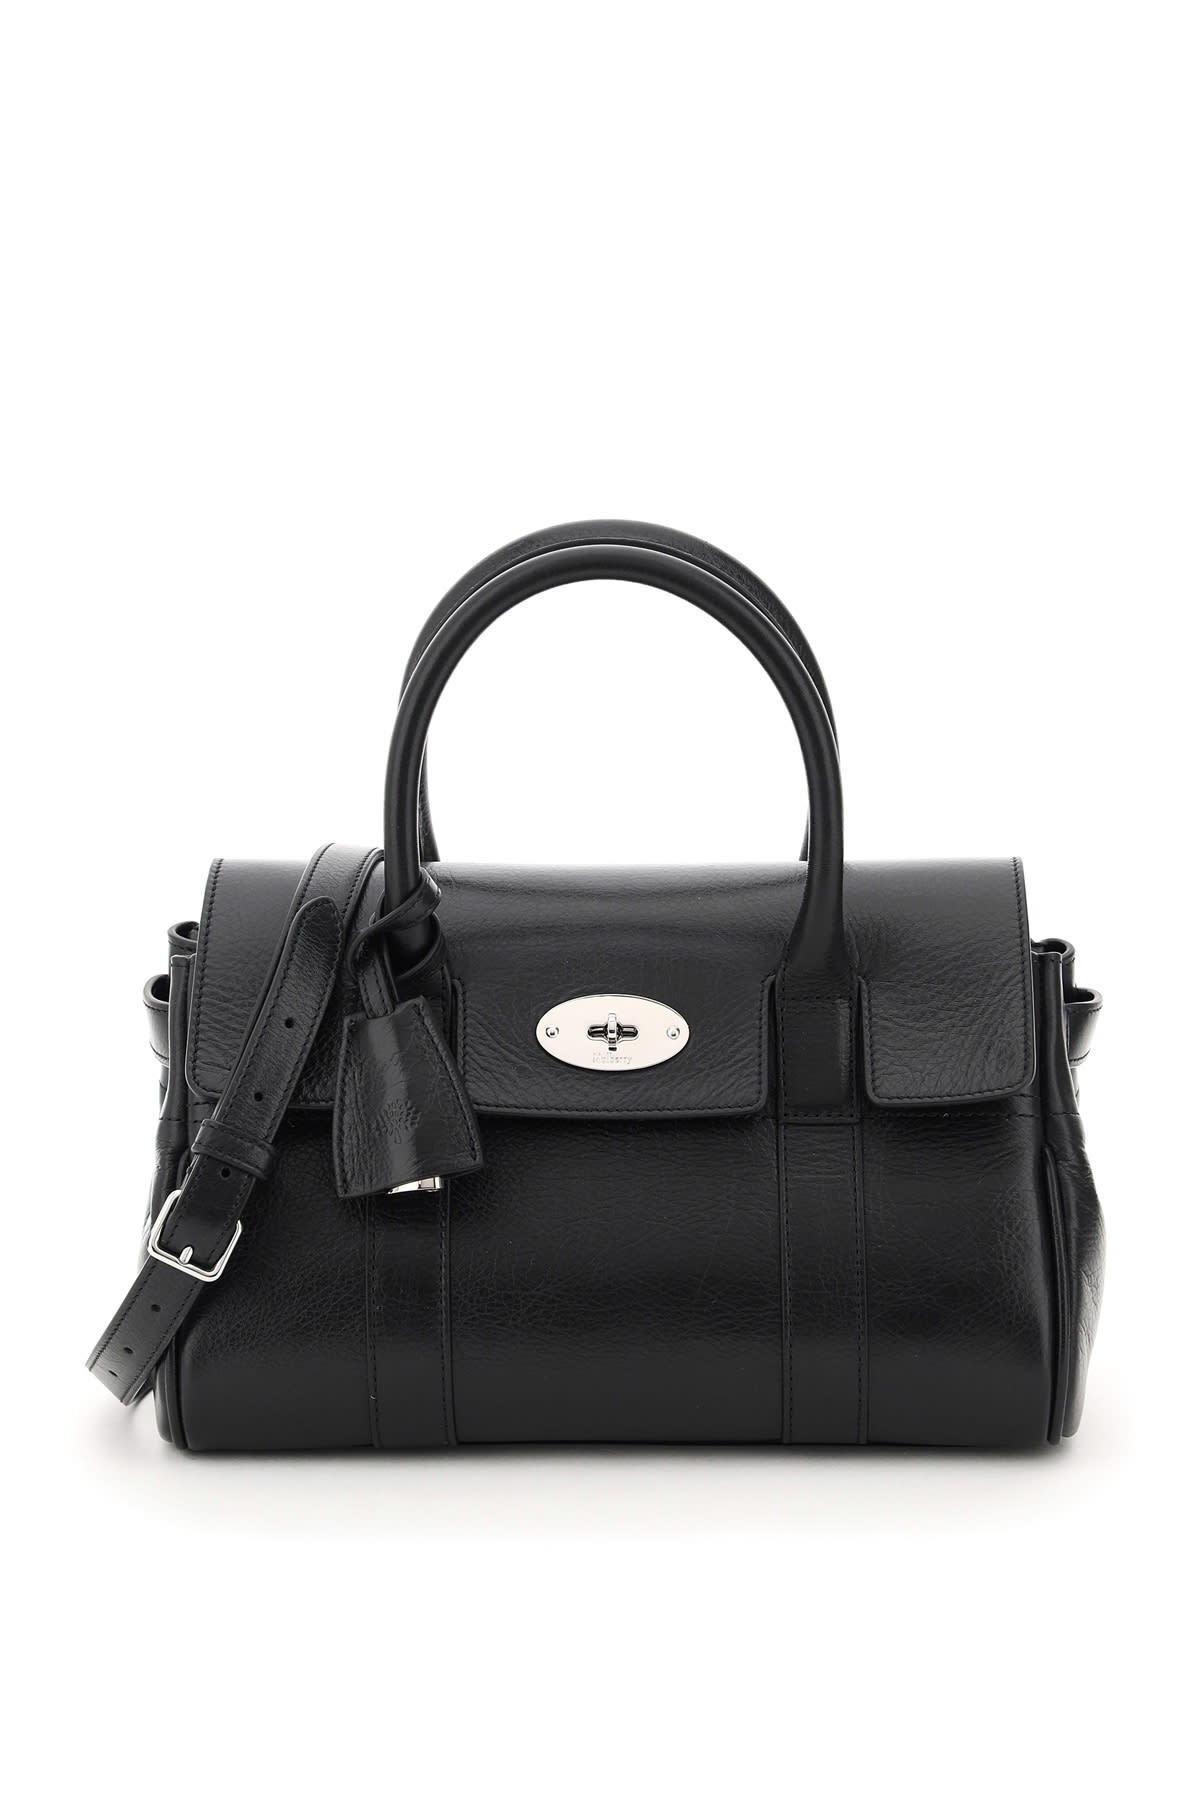 MULBERRY BAYSWATER SOFT SMALL BAG,HH6607 213 A100